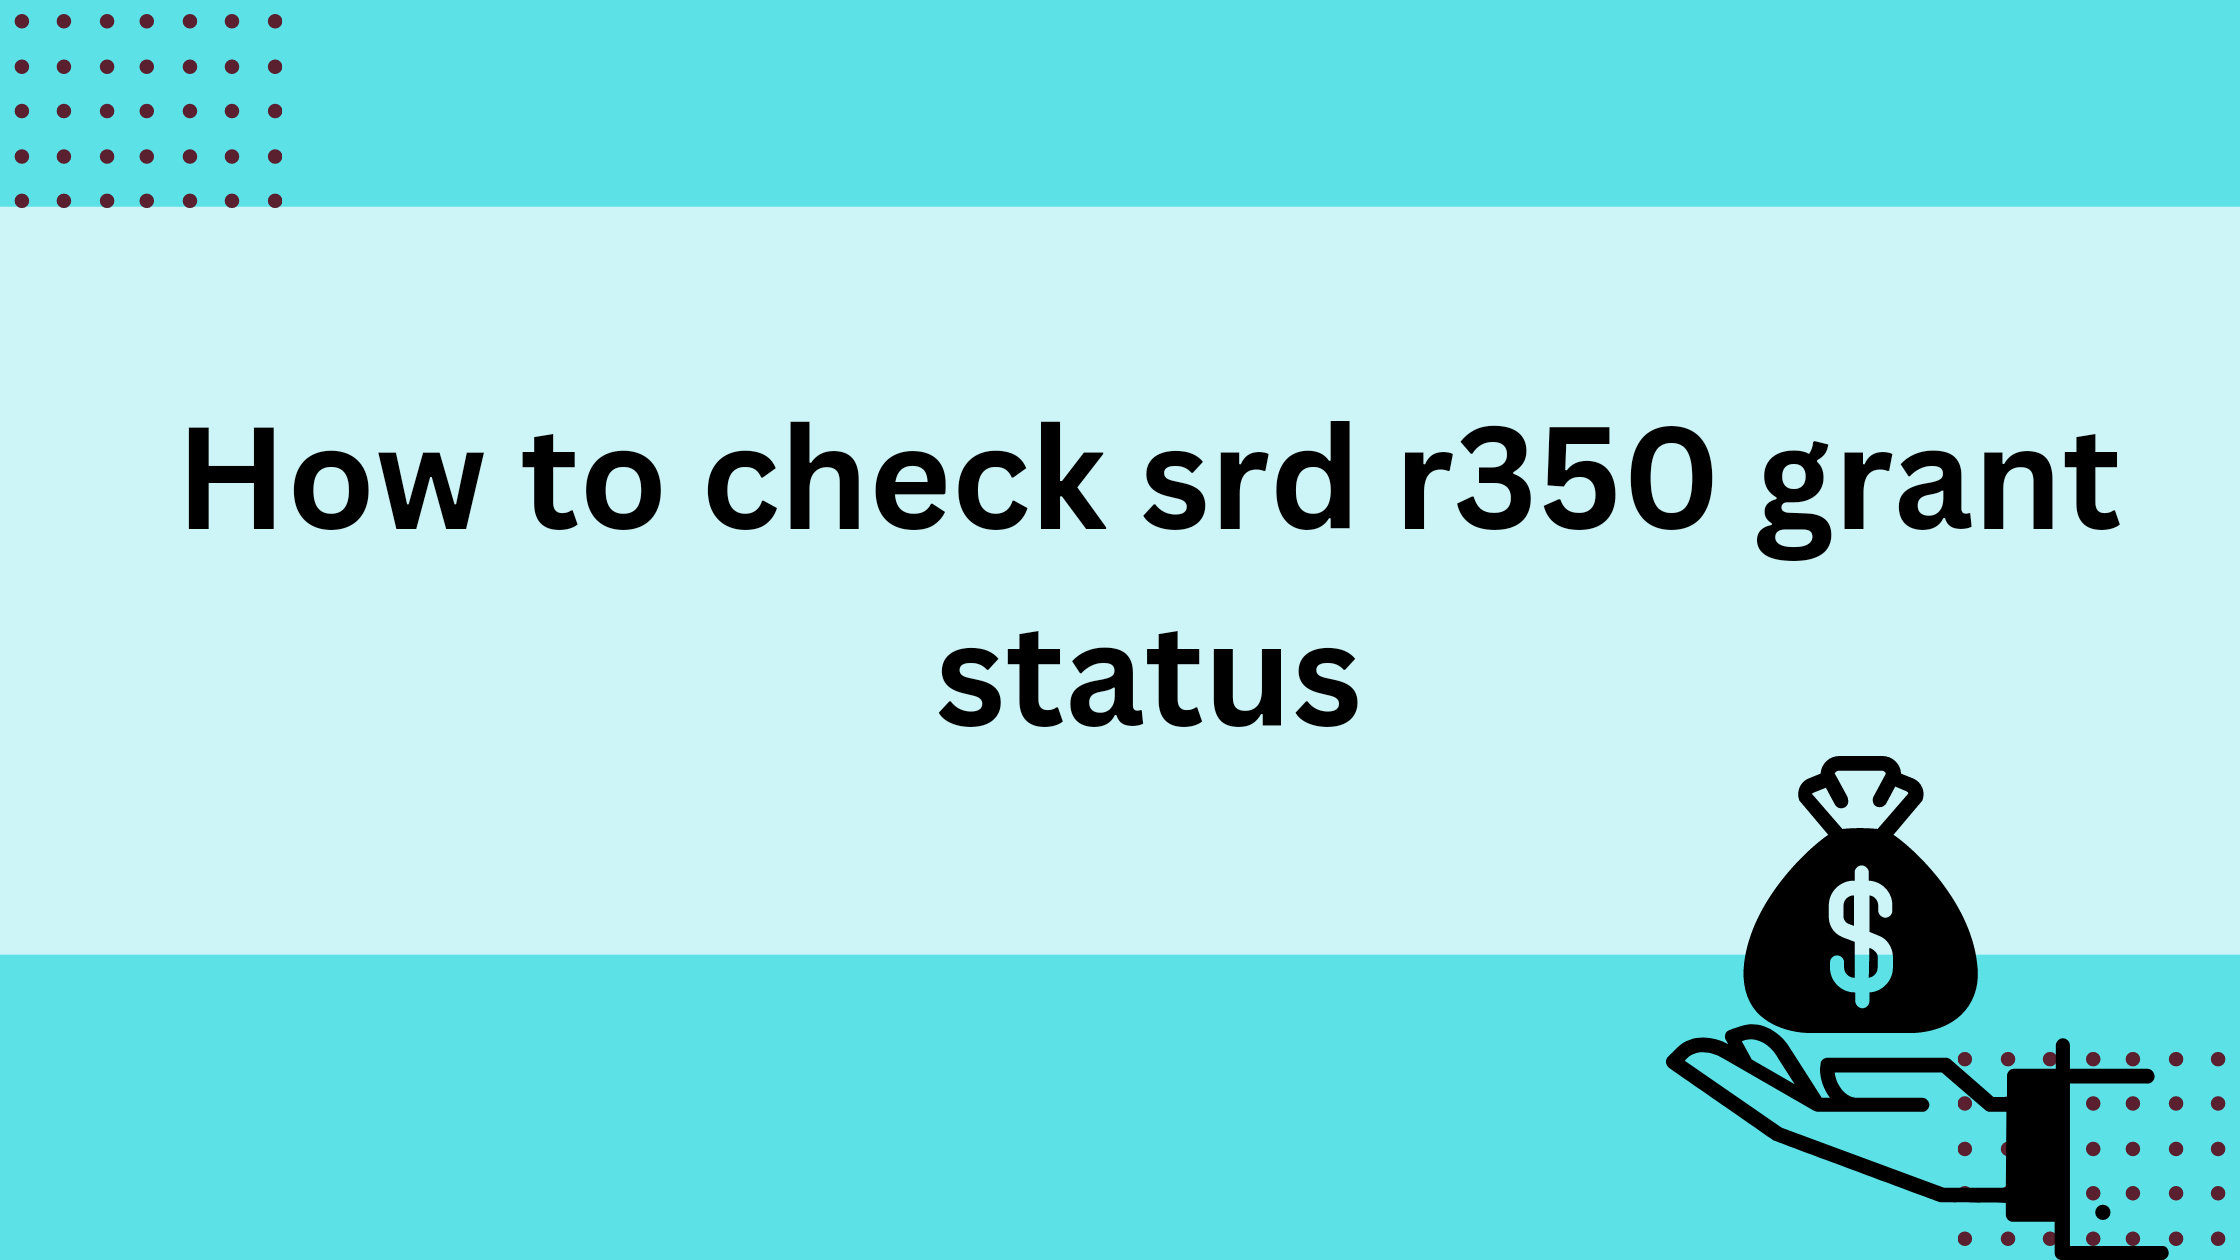 How to check srd r350 grant status